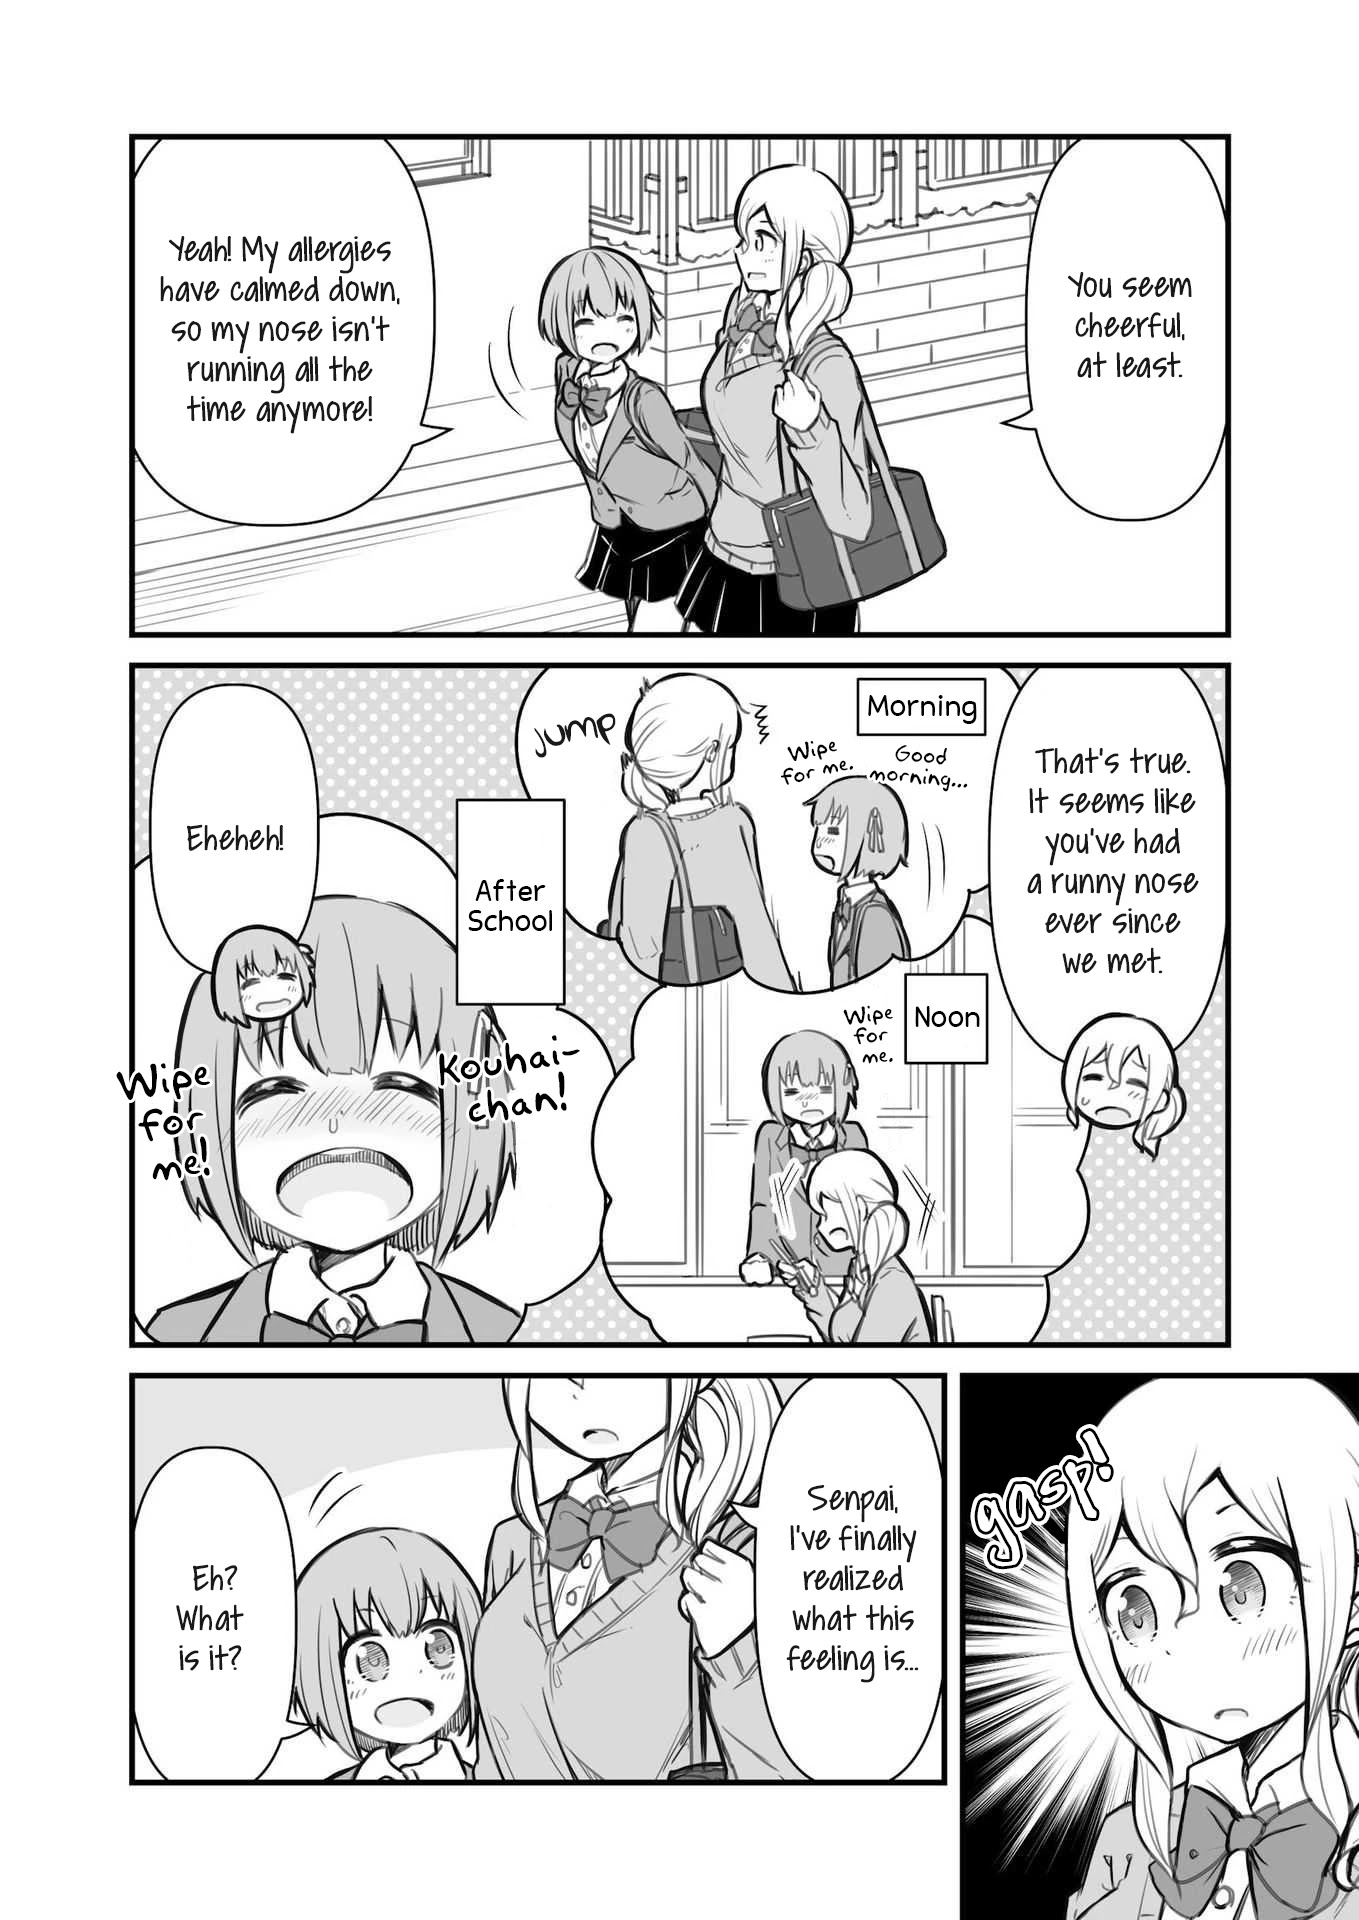 Love Runs From The Nose - Page 2